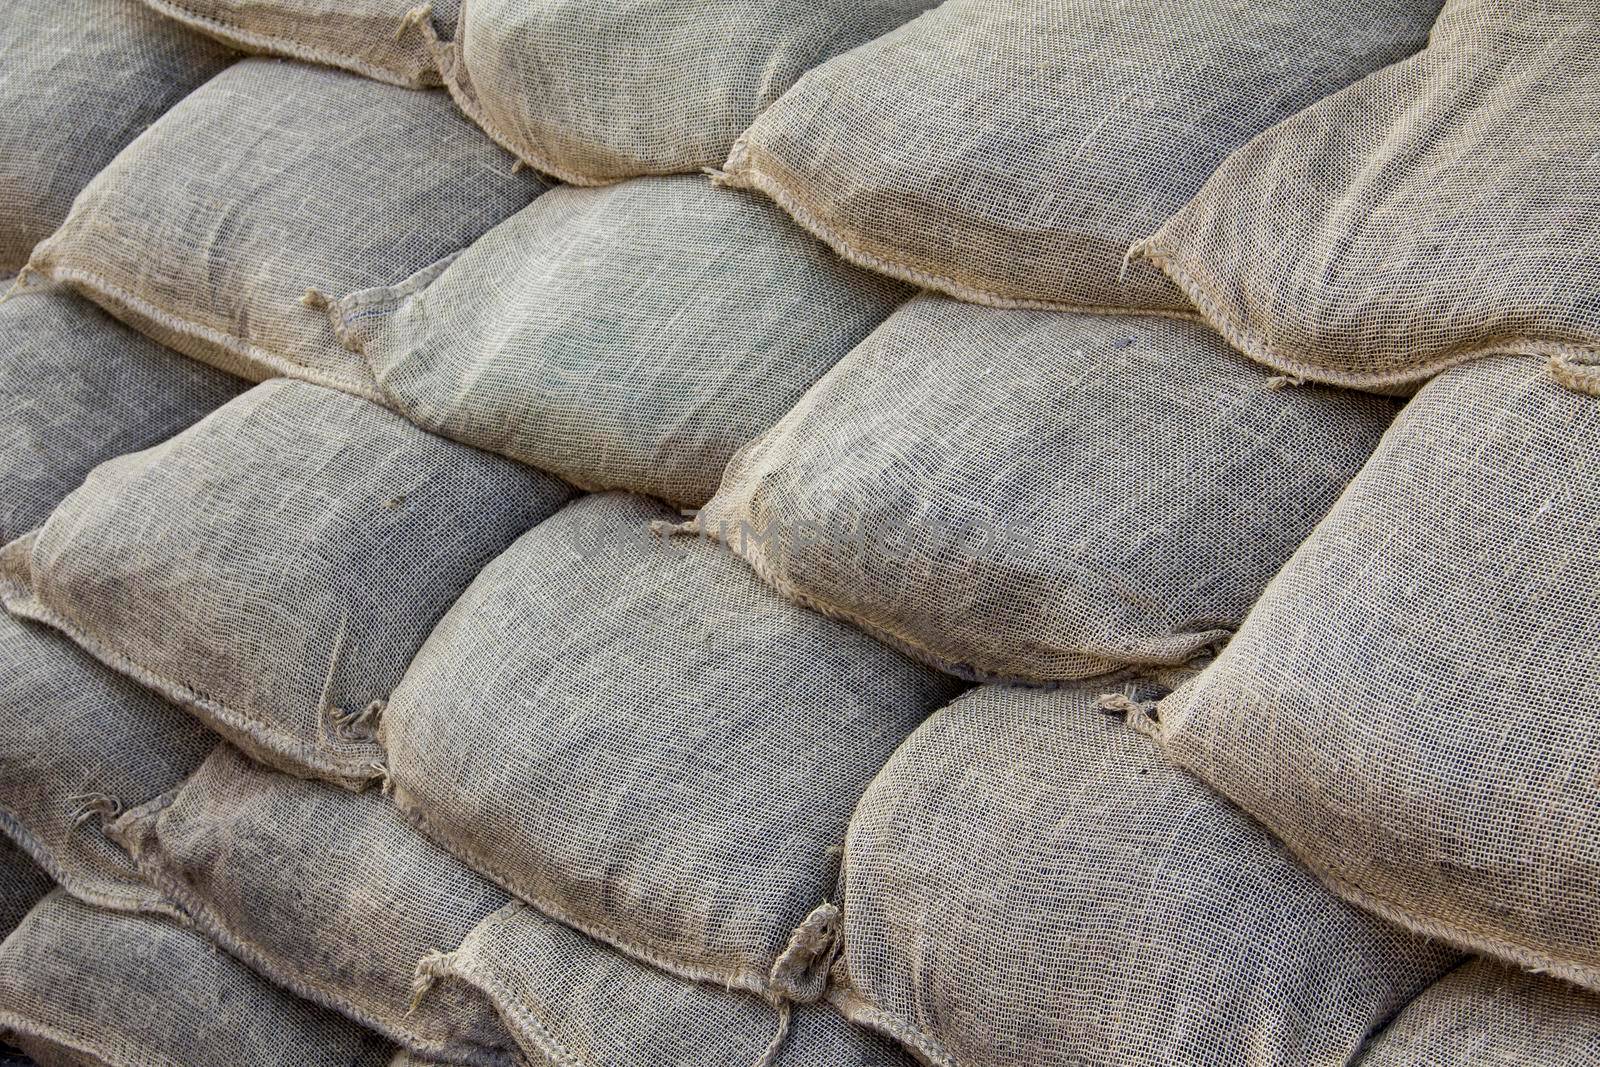 Background of lying dirty sandbags. Sandbag flood protection wall texture, texture. Bags to strengthen the defensive structure during the battle. Background